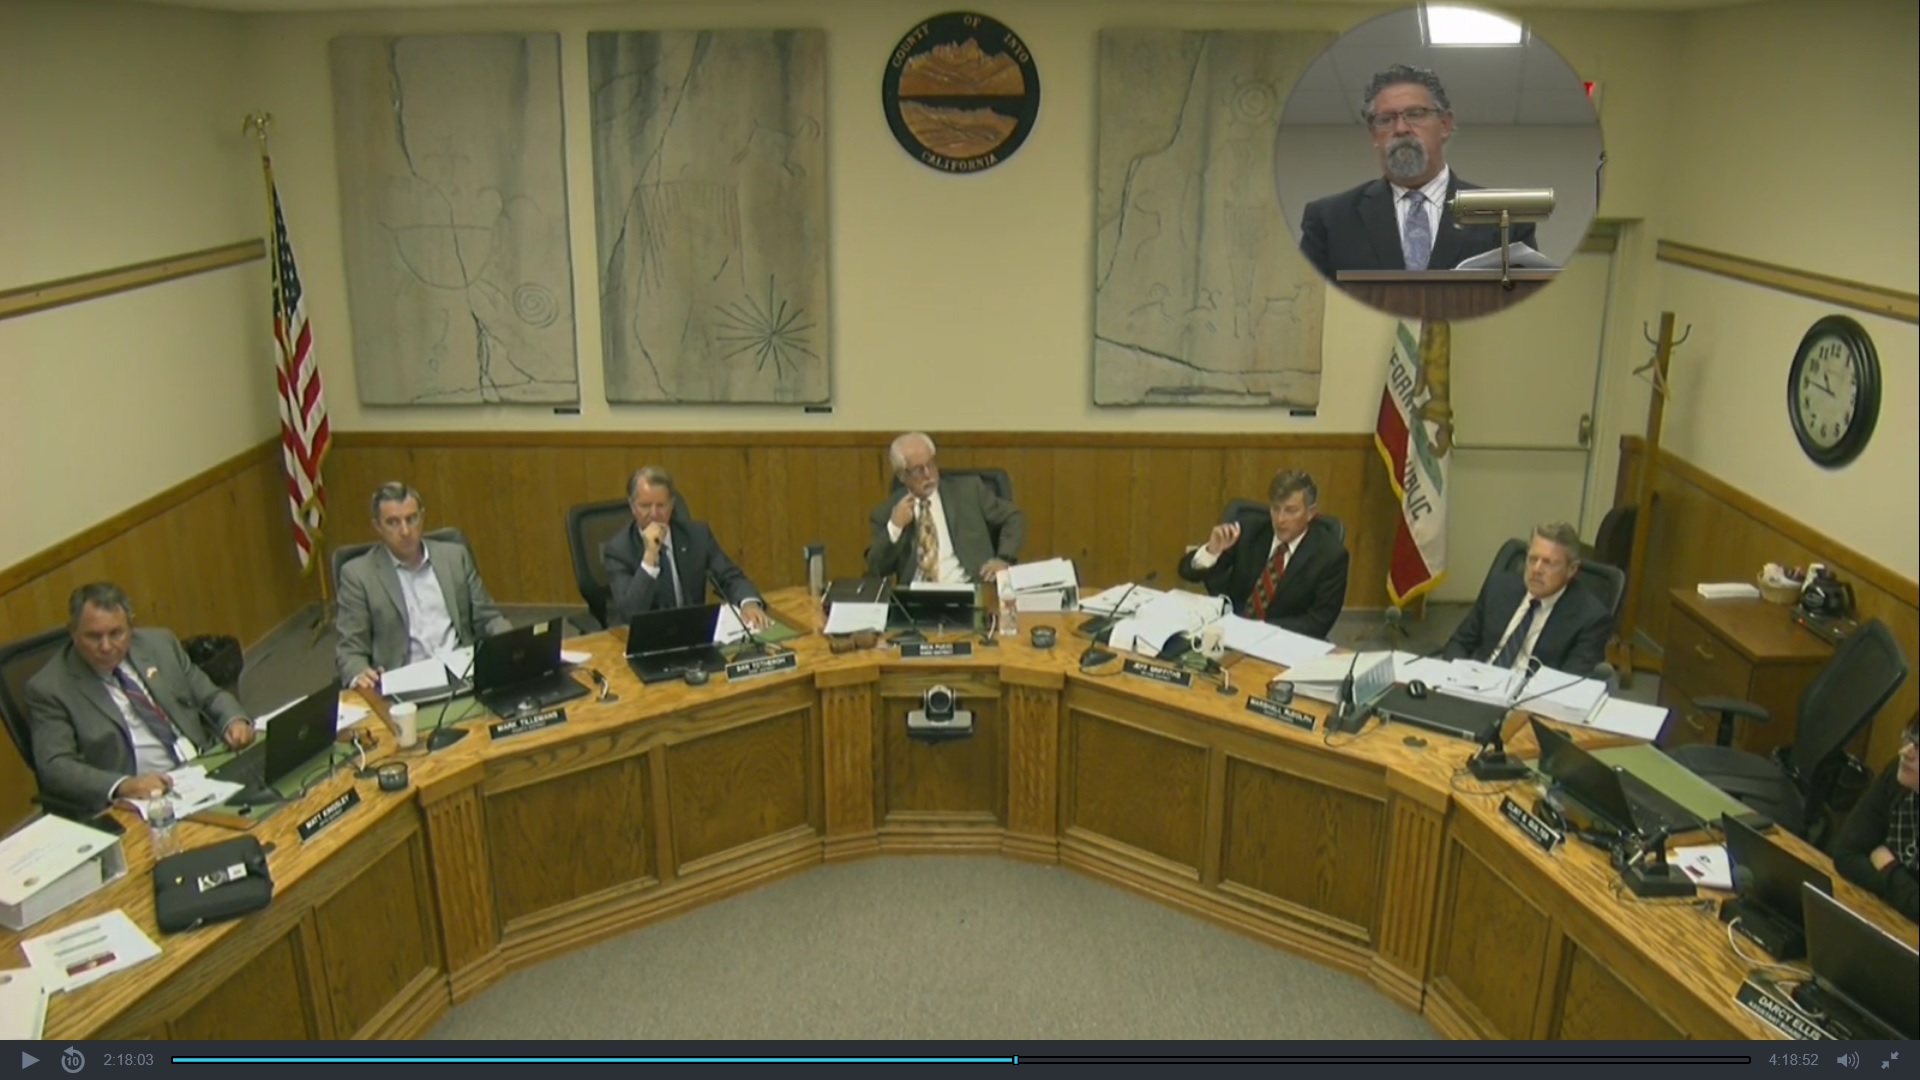 Screenshot of Board of Supervisors meeting, showing five Board members seated at dais along with County Counsel, while CAO speaks from podium, as seen in upper right hand corner.